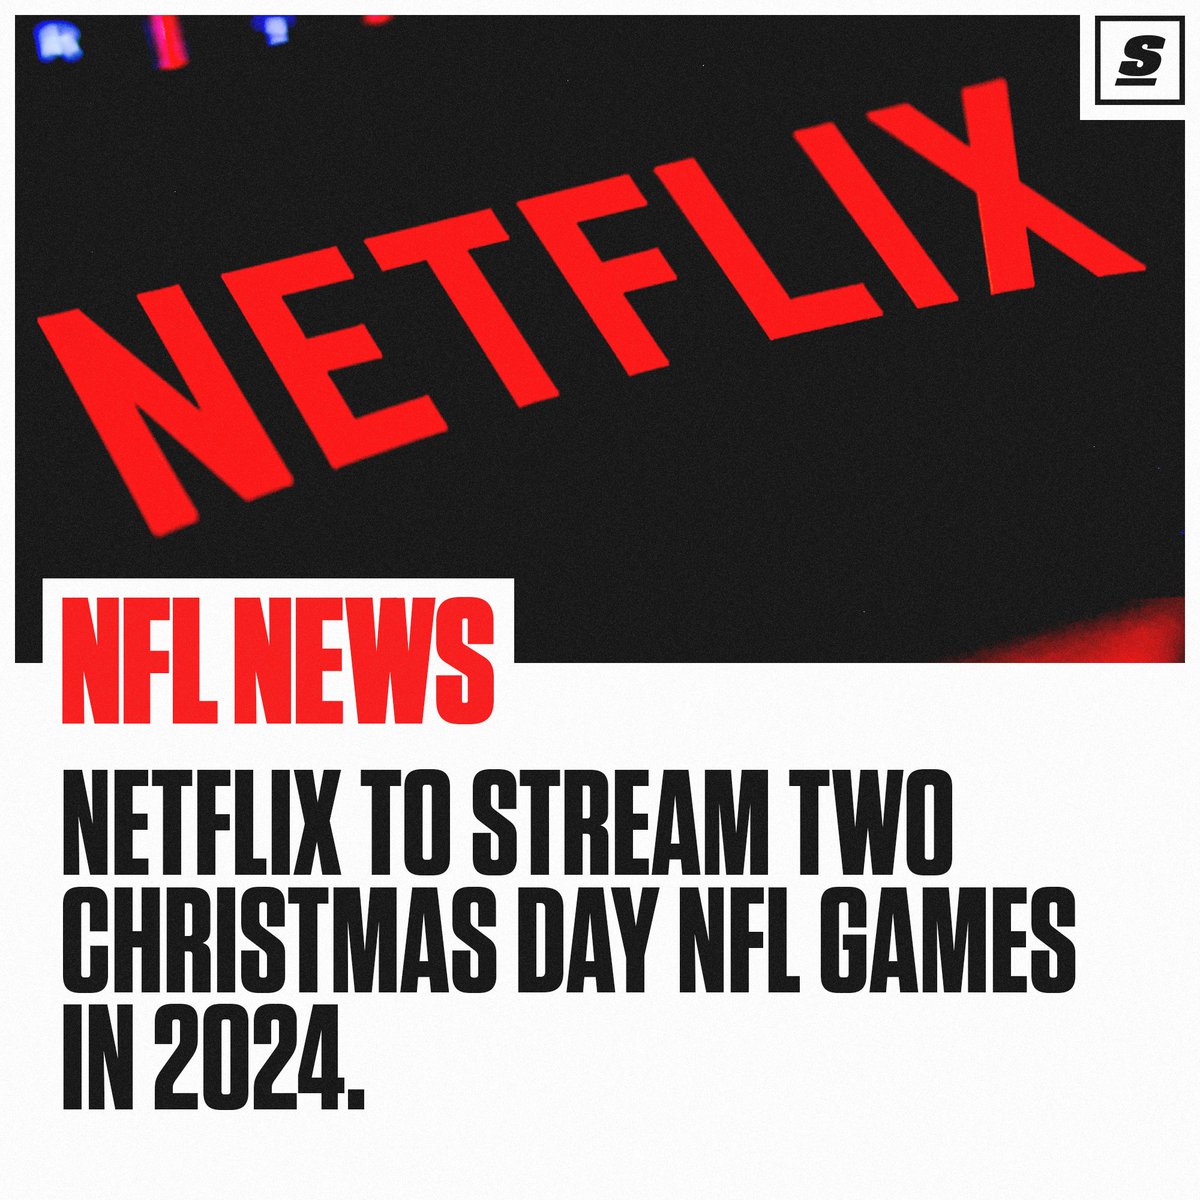 The NFL is coming to Netflix this Christmas. 👀🎄